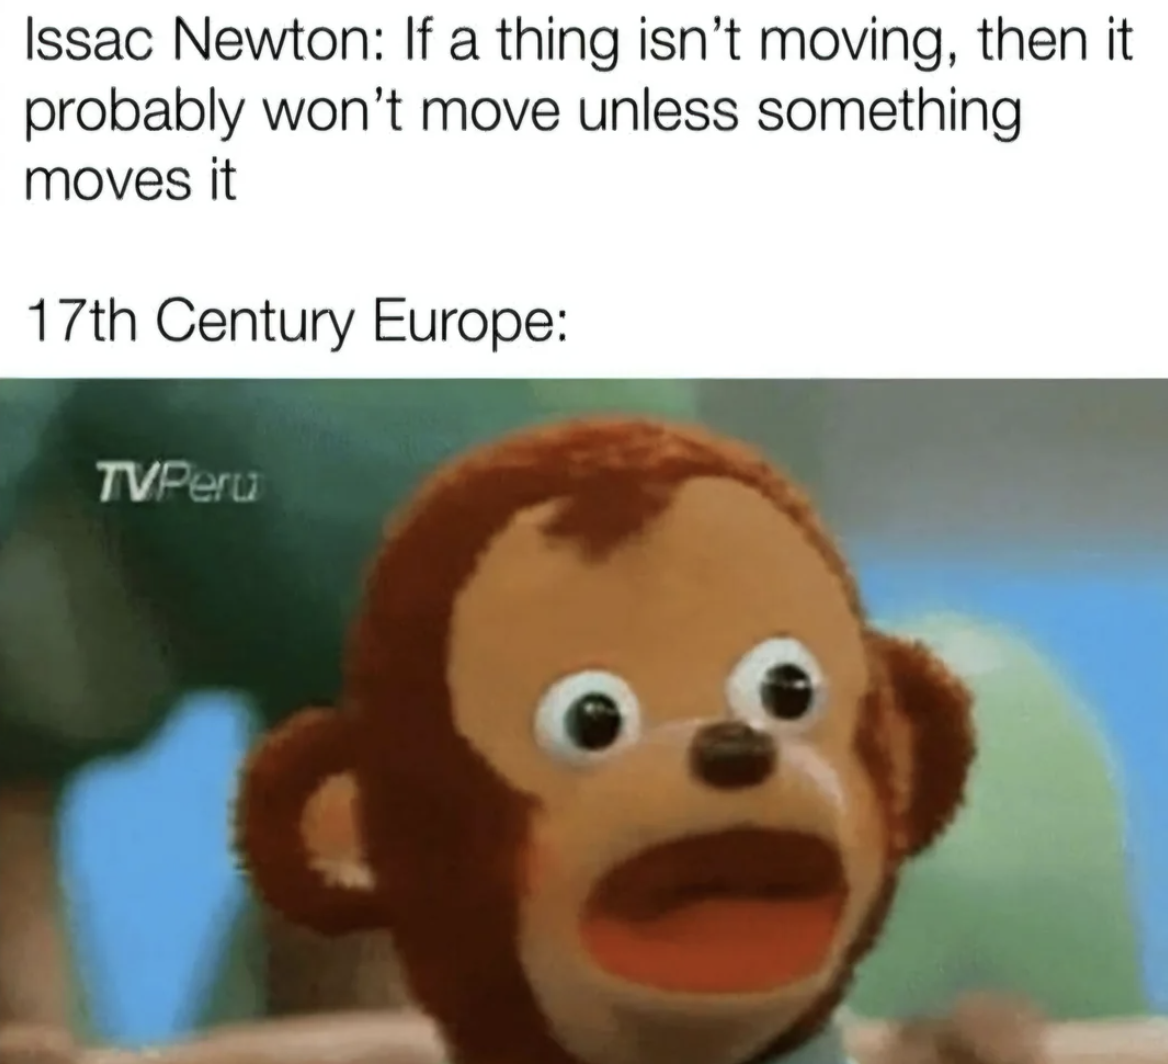 cartoon - Issac Newton If a thing isn't moving, then it probably won't move unless something moves it 17th Century Europe TVPeru